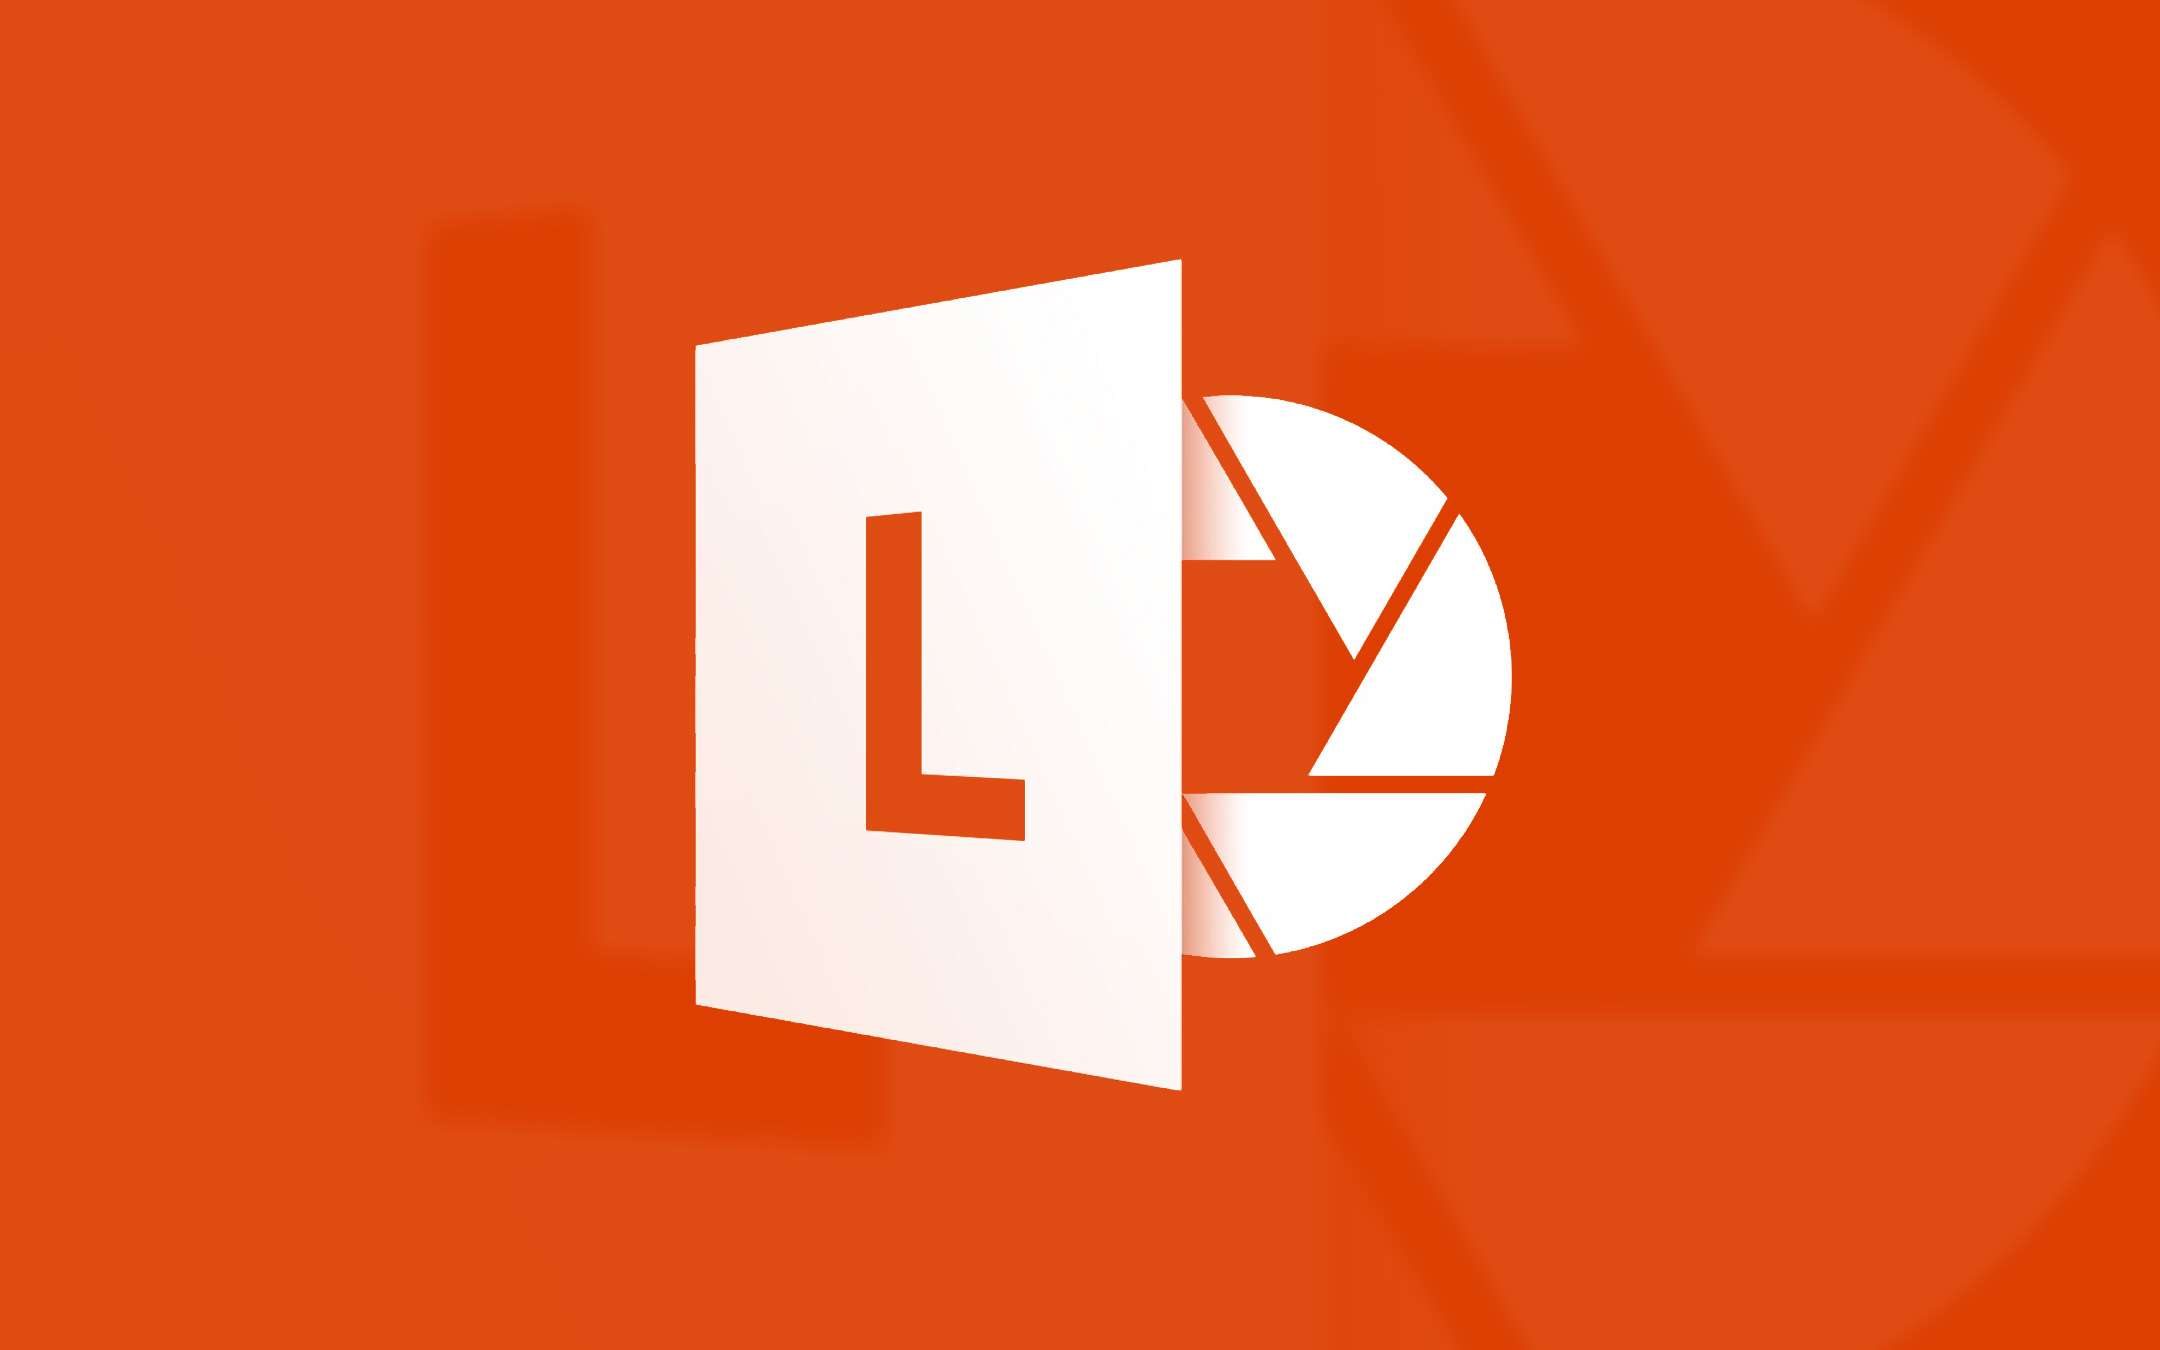 The Office Lens application becomes Microsoft Lens